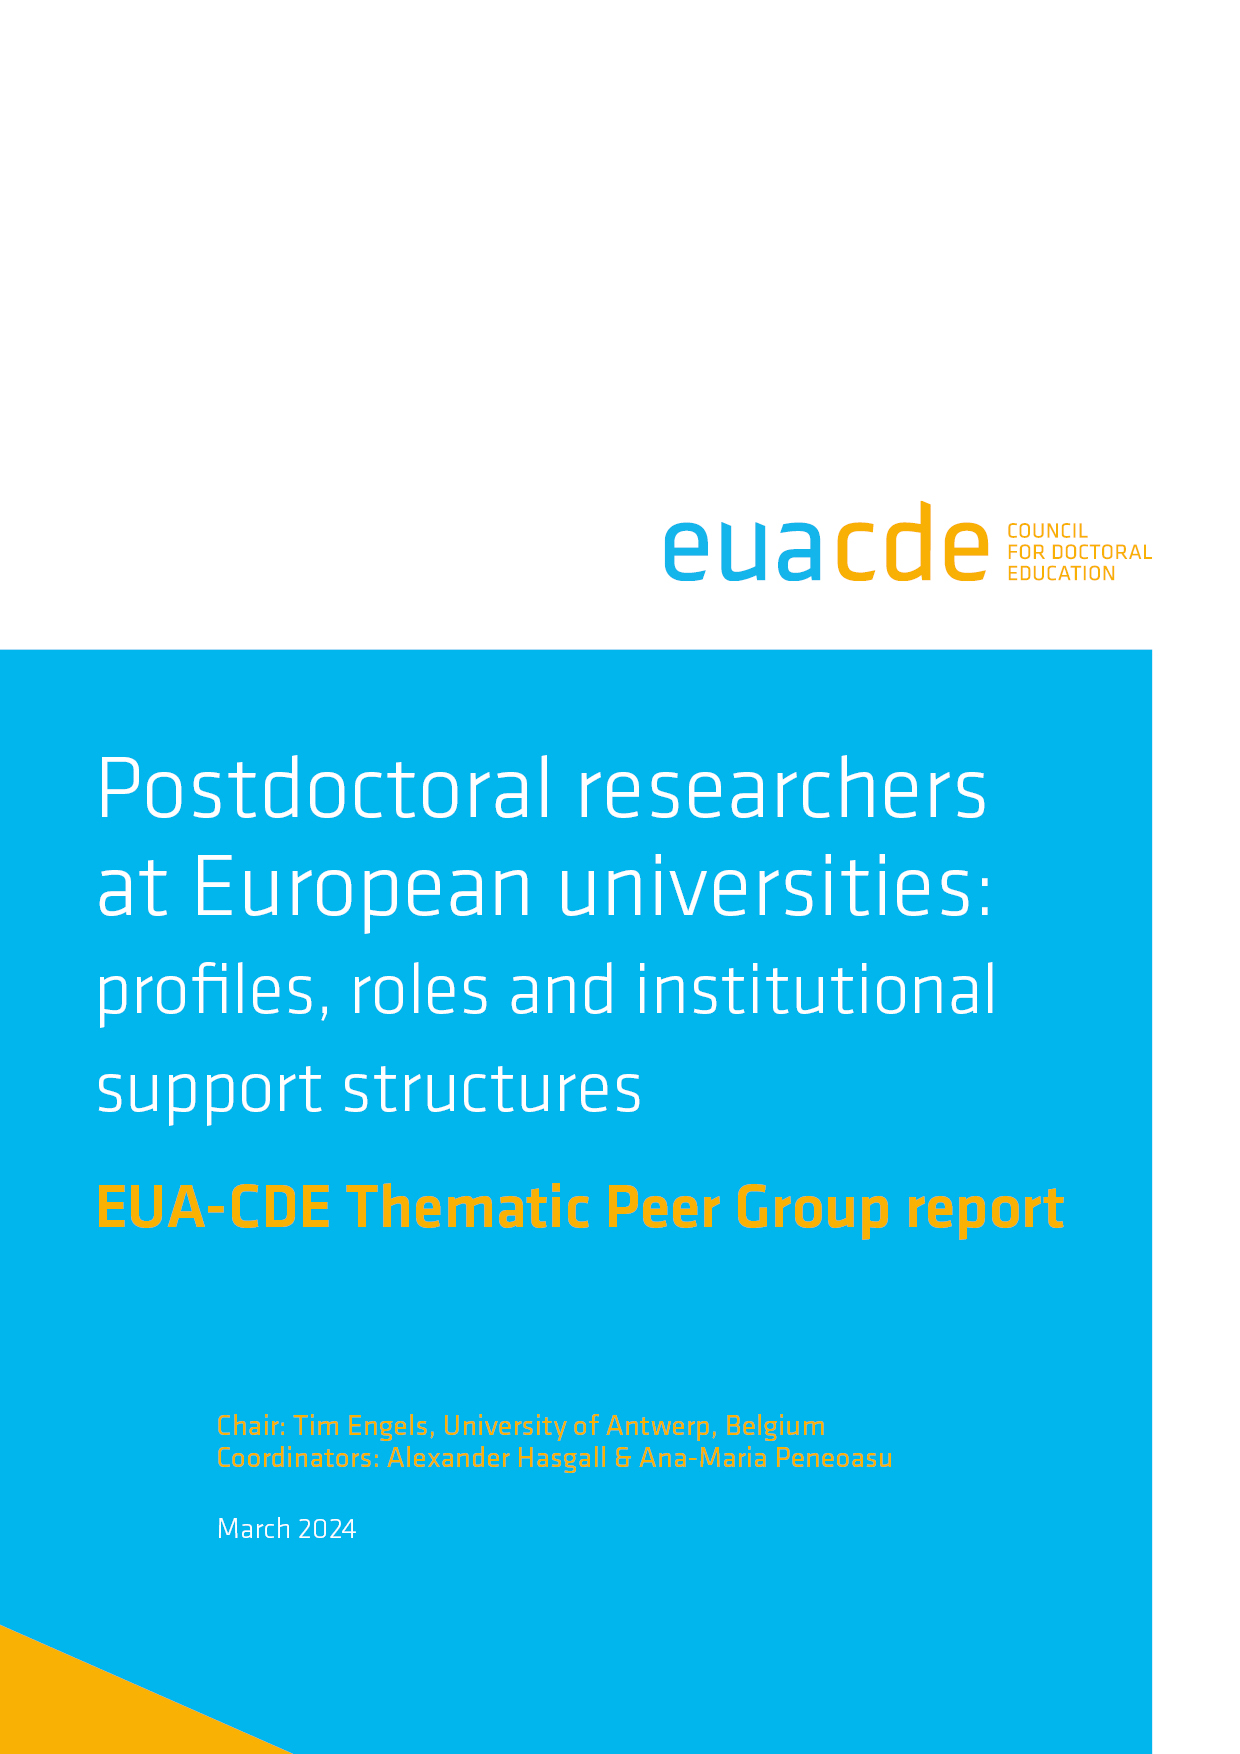 Postdoctoral researchers at European universities: profiles, roles and institutional support structures